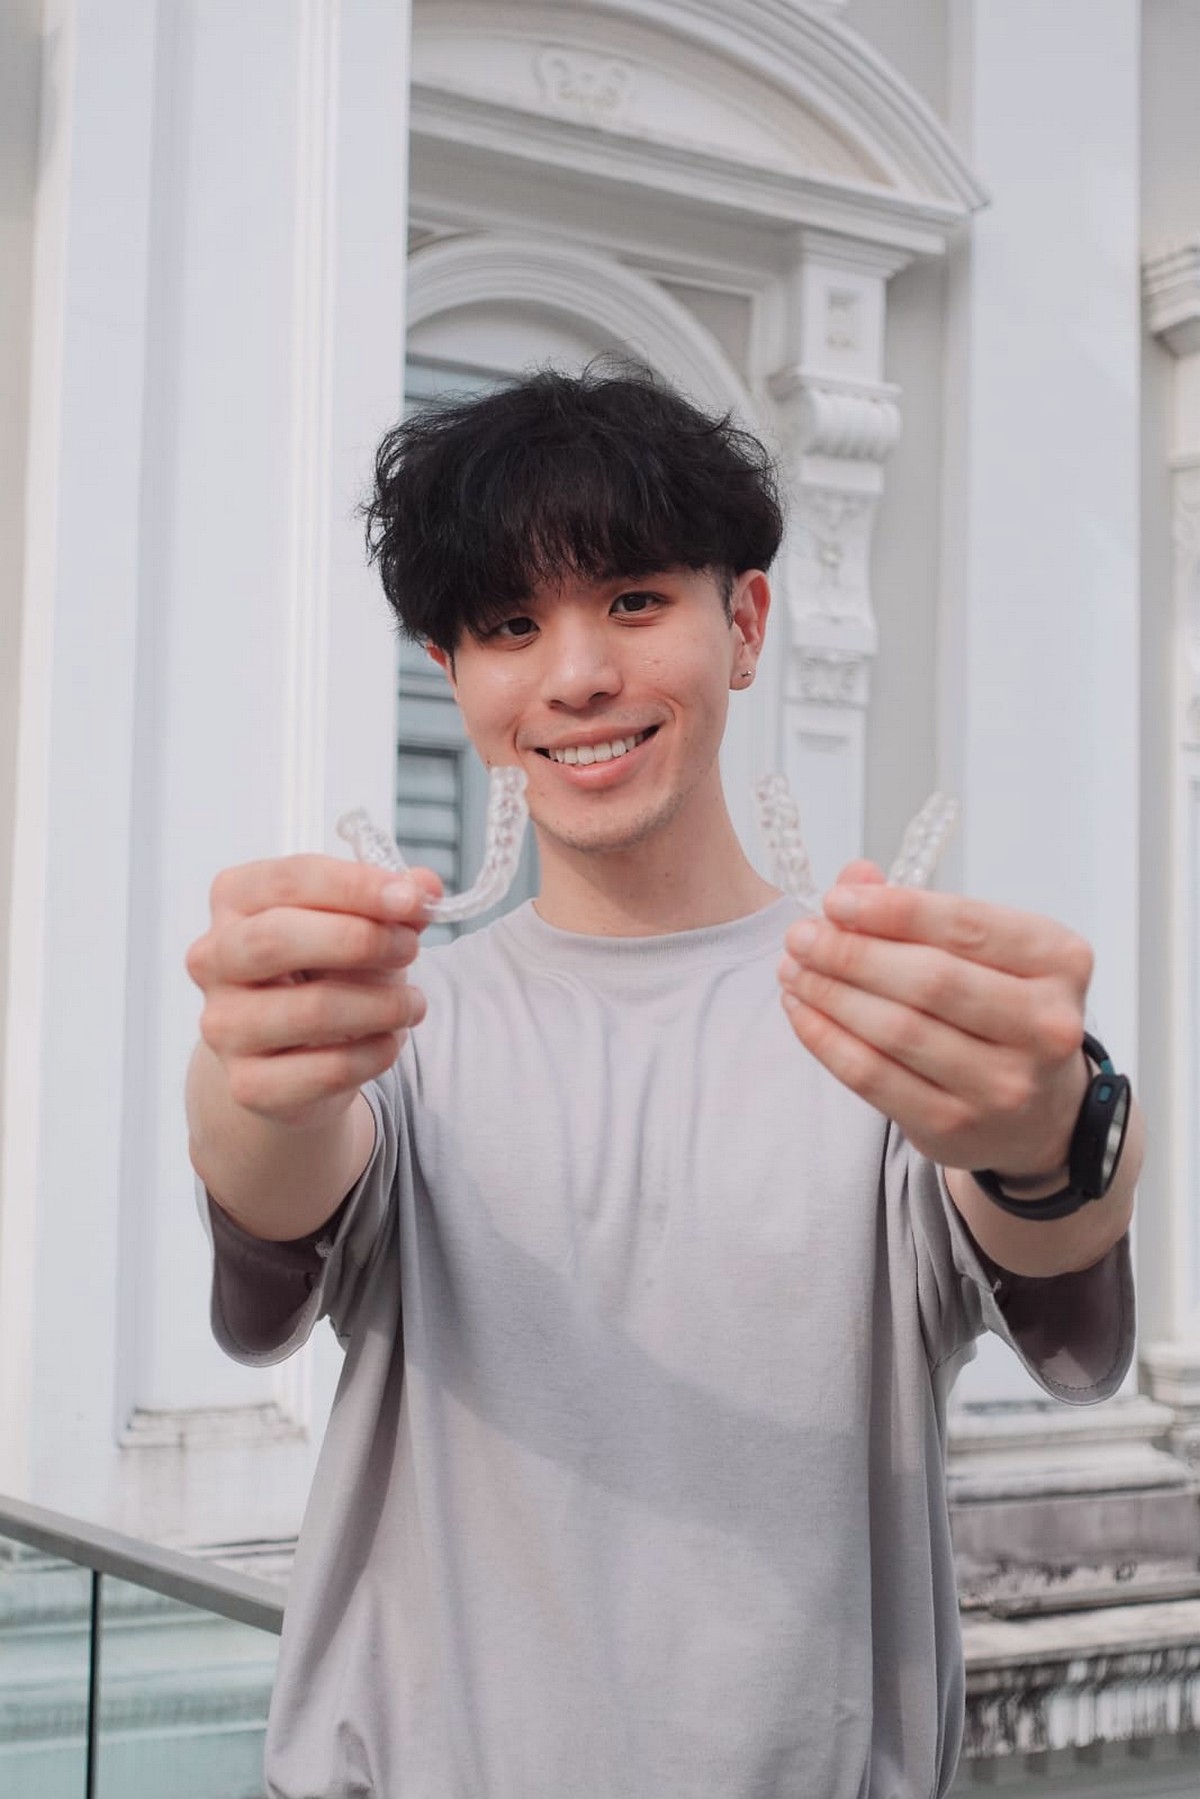 DOUGLAS-ONG-_-IG-POST-2_-LIFESTYLE-IMAGE-SMILING-SHOTS-TRANSFORMATION-3 Now till 31 Aug 2022: Free Smile Assessment with Extra Discounts on Zenyum Invisible Braces